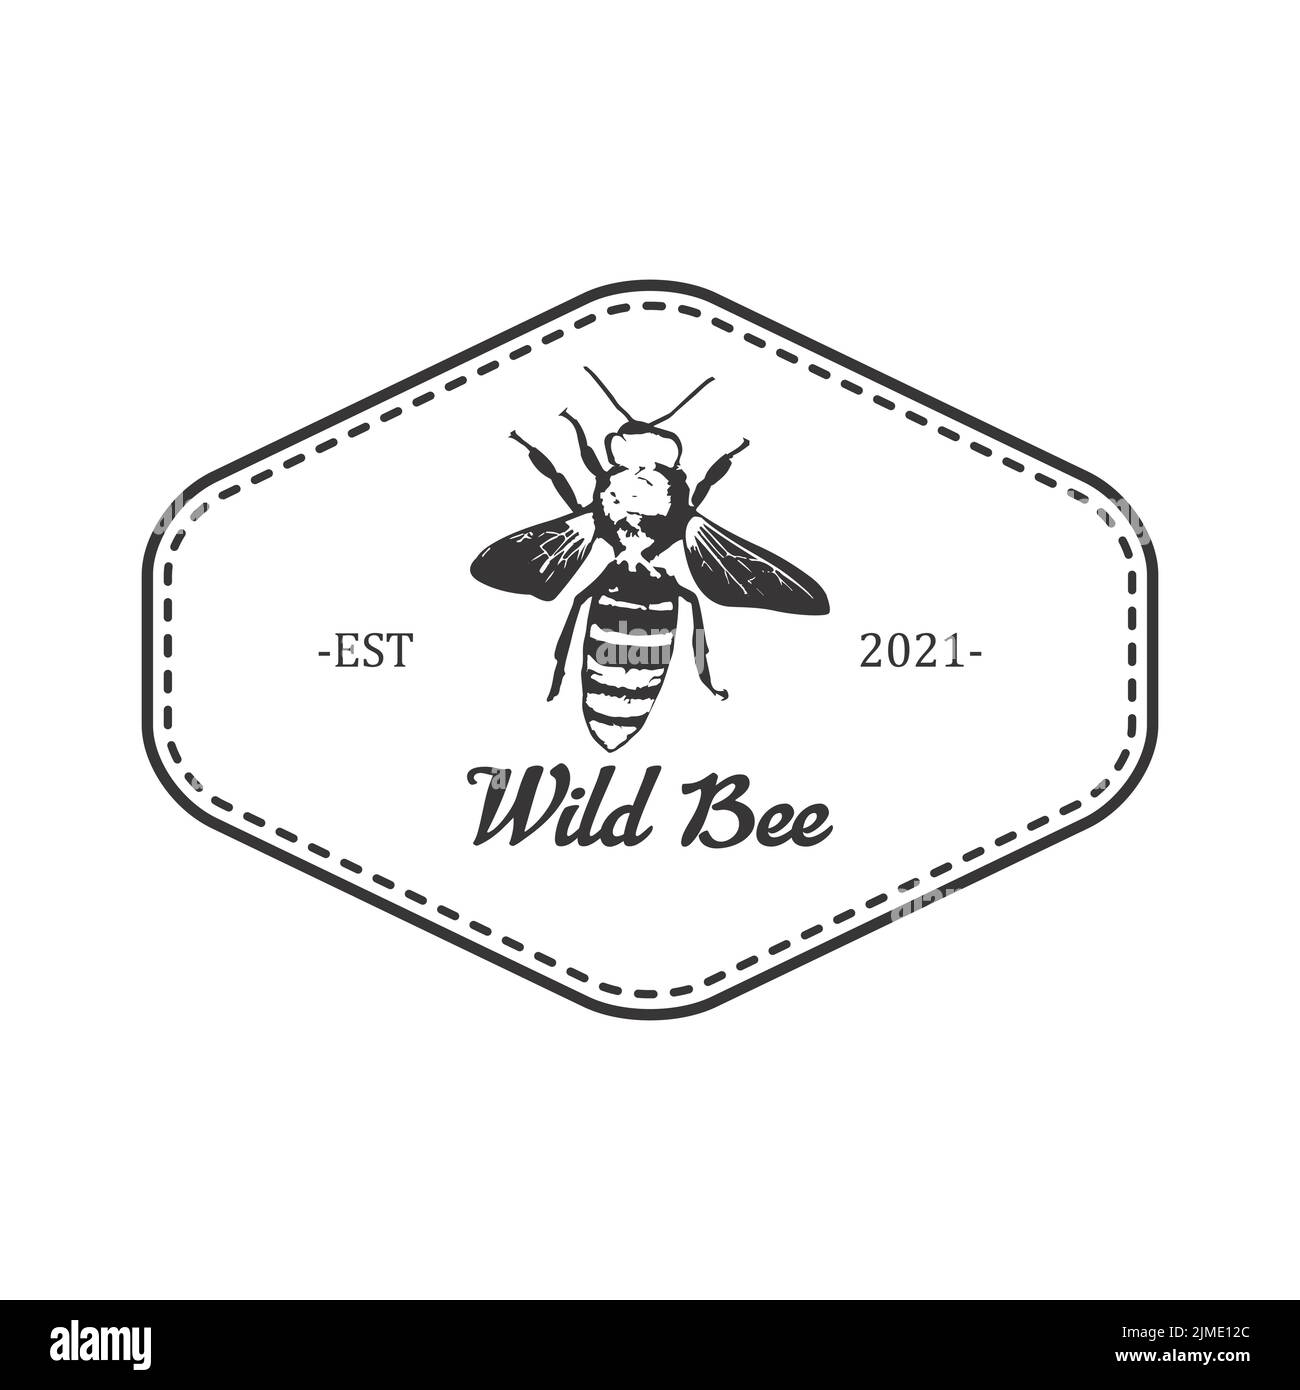 A wild bee vintage logo isolated on a white background Stock Vector